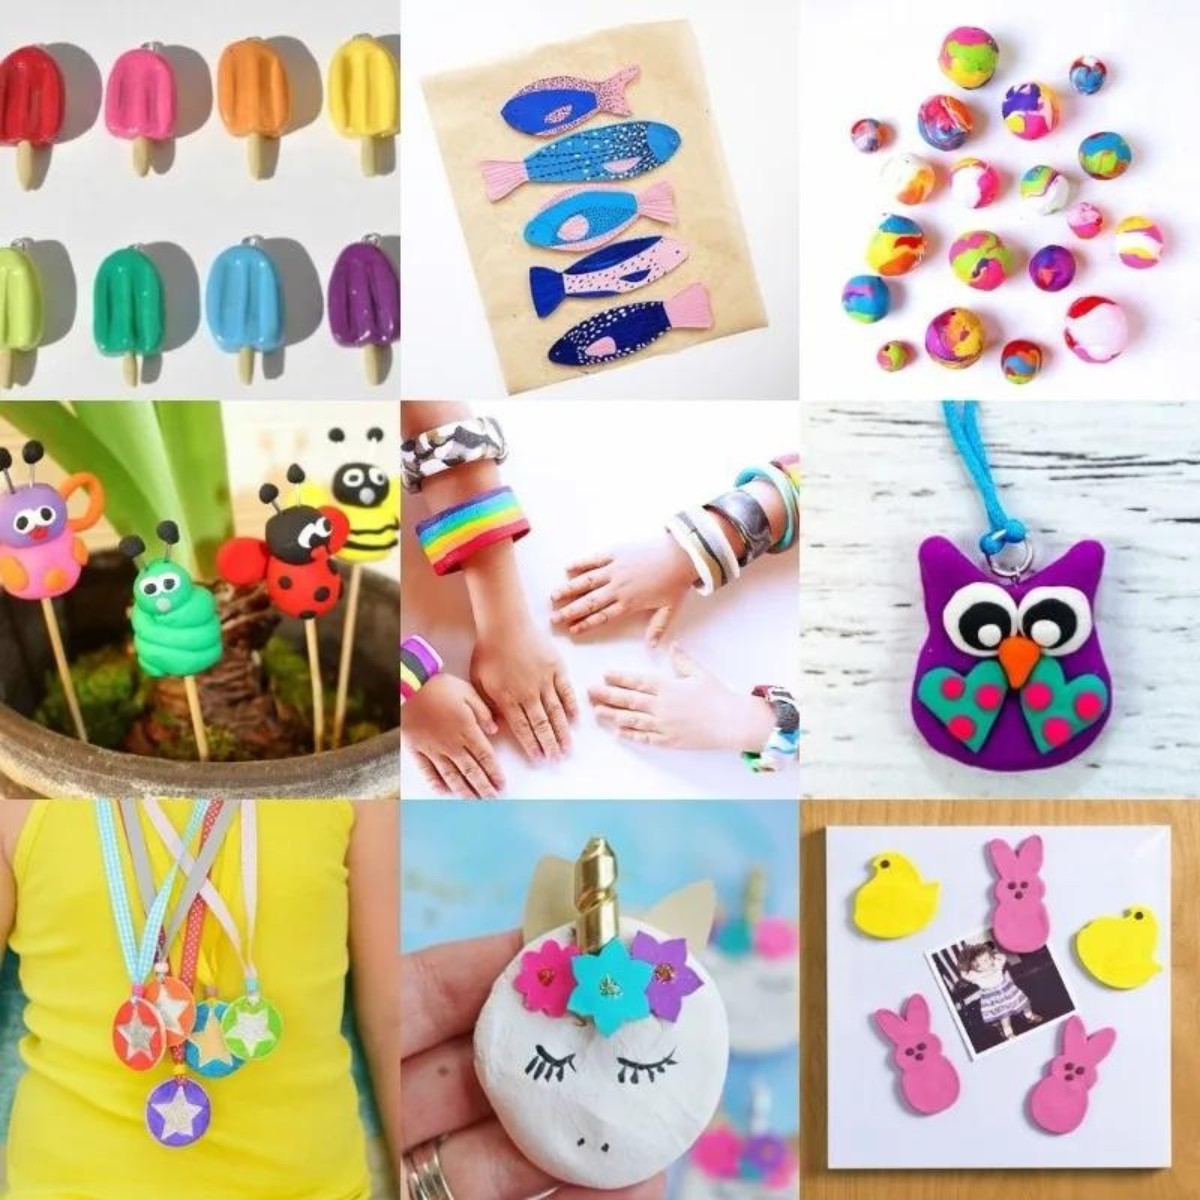 Clay Crafts for Kids: Fun Projects to Mold and Create - DIY Candy